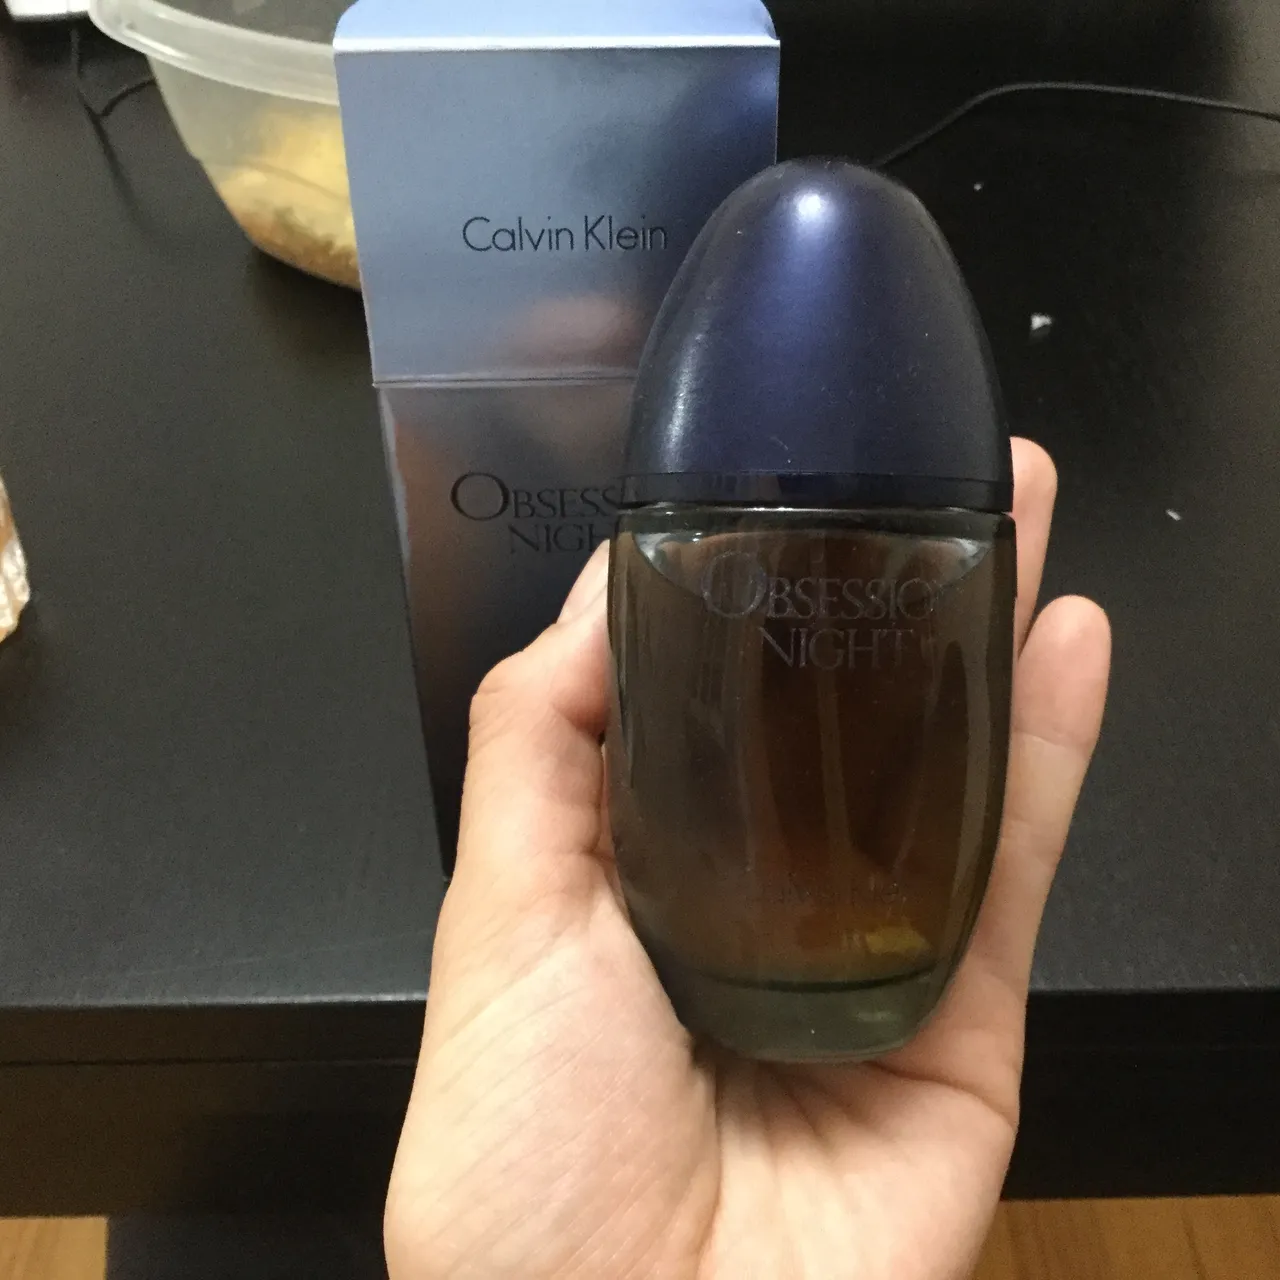 Obsession night by Calvin Klein (perfume for women) photo 3